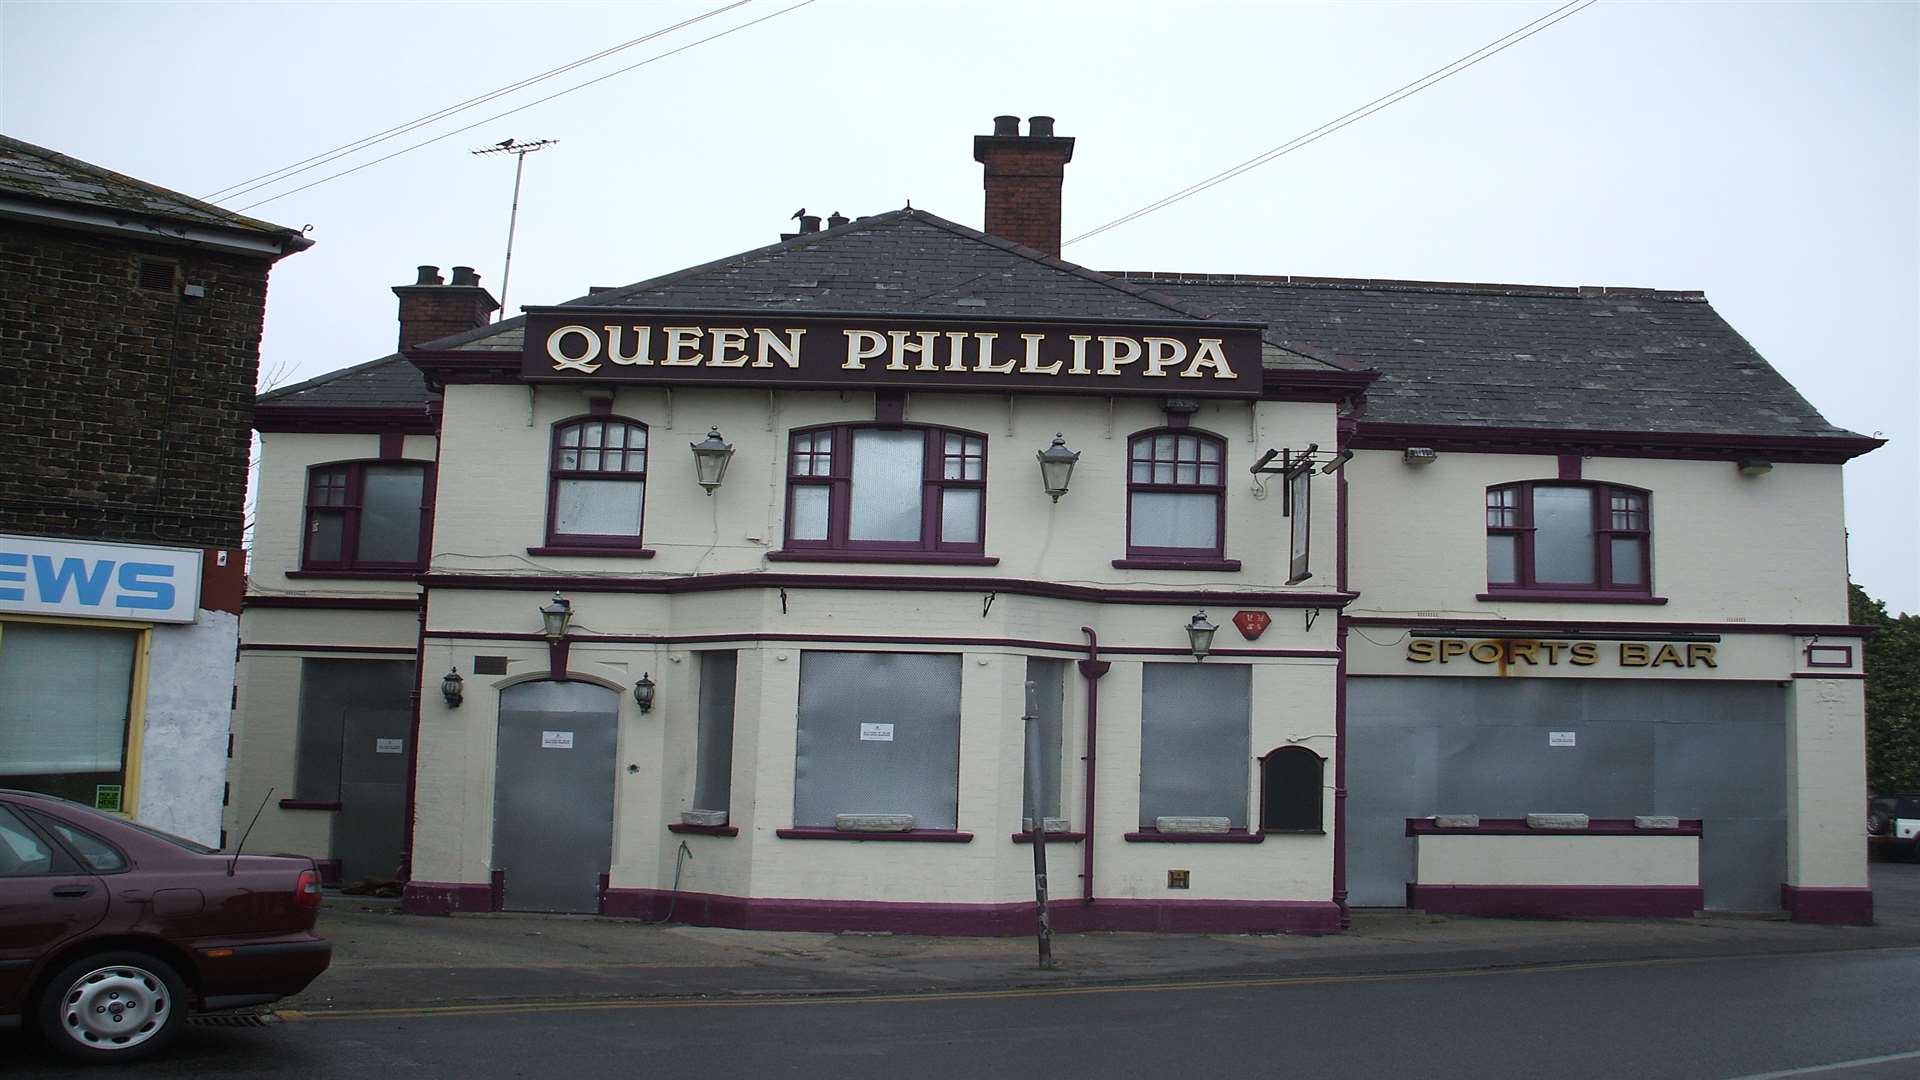 A boarded-up Queen Phillippa pictured a few years ago.